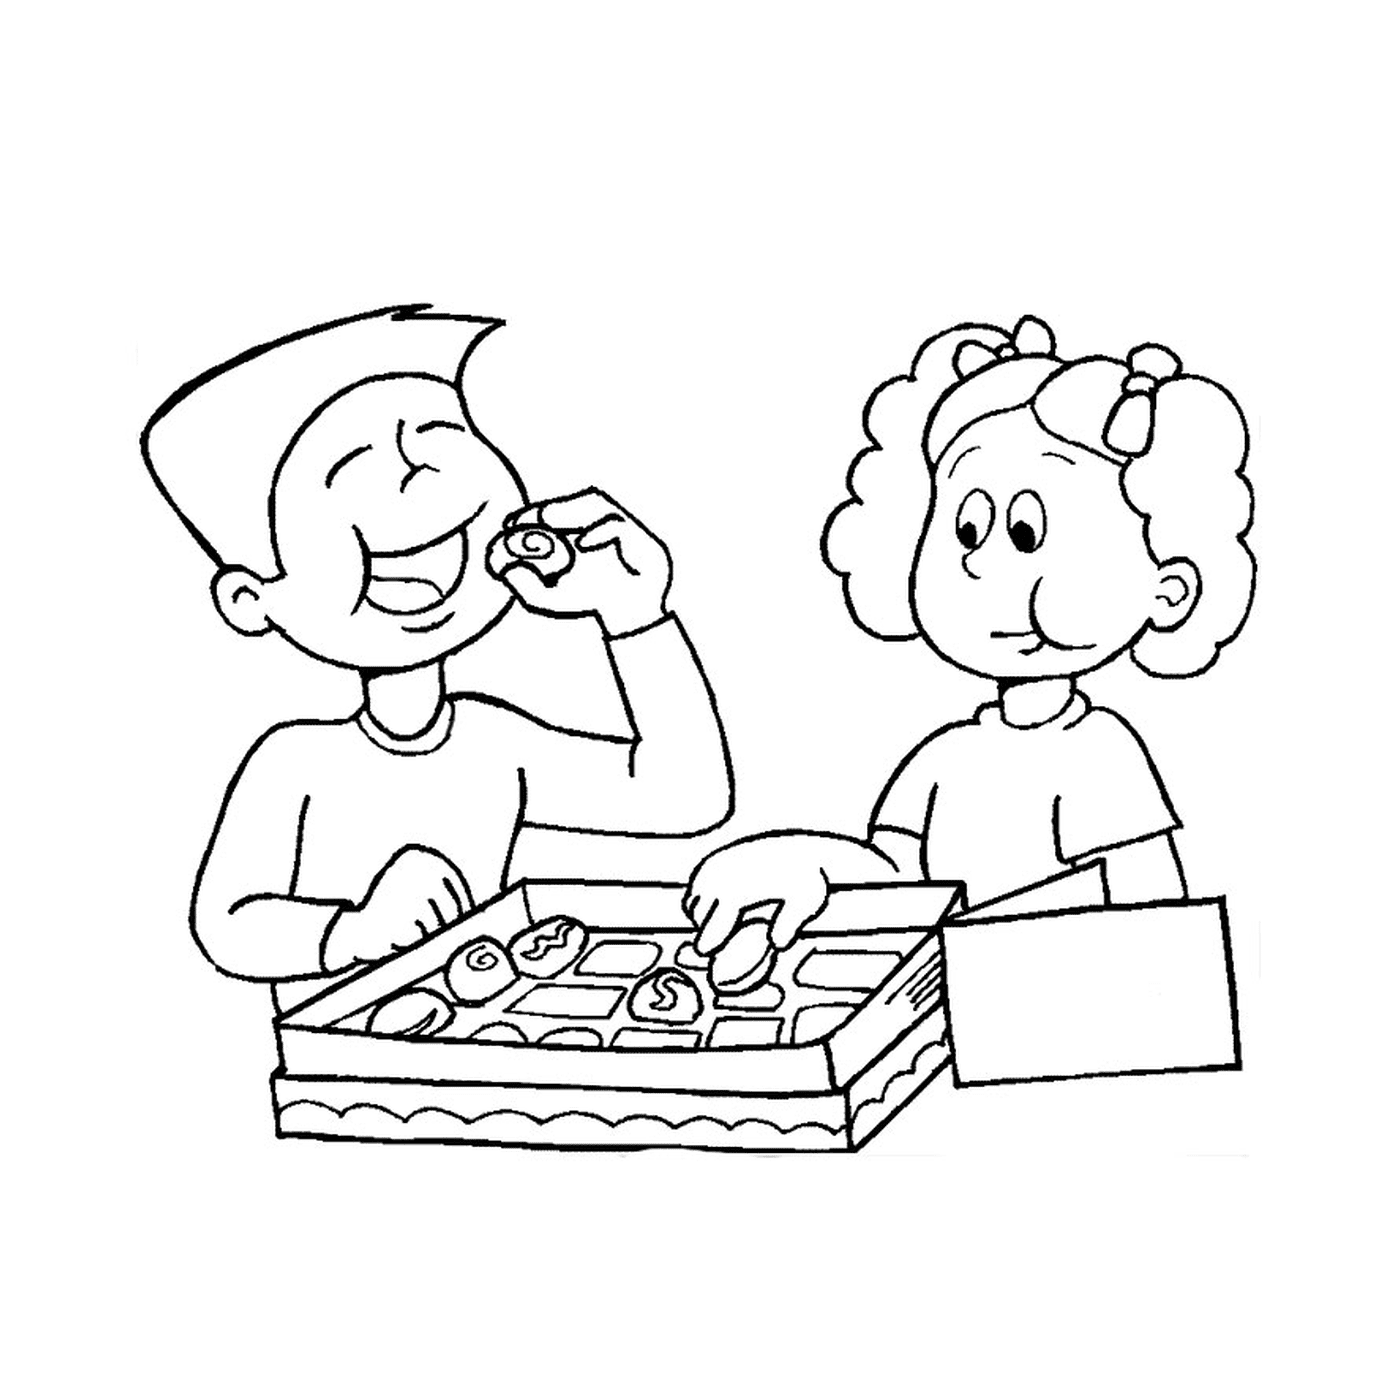  A boy and a girl eating donuts 